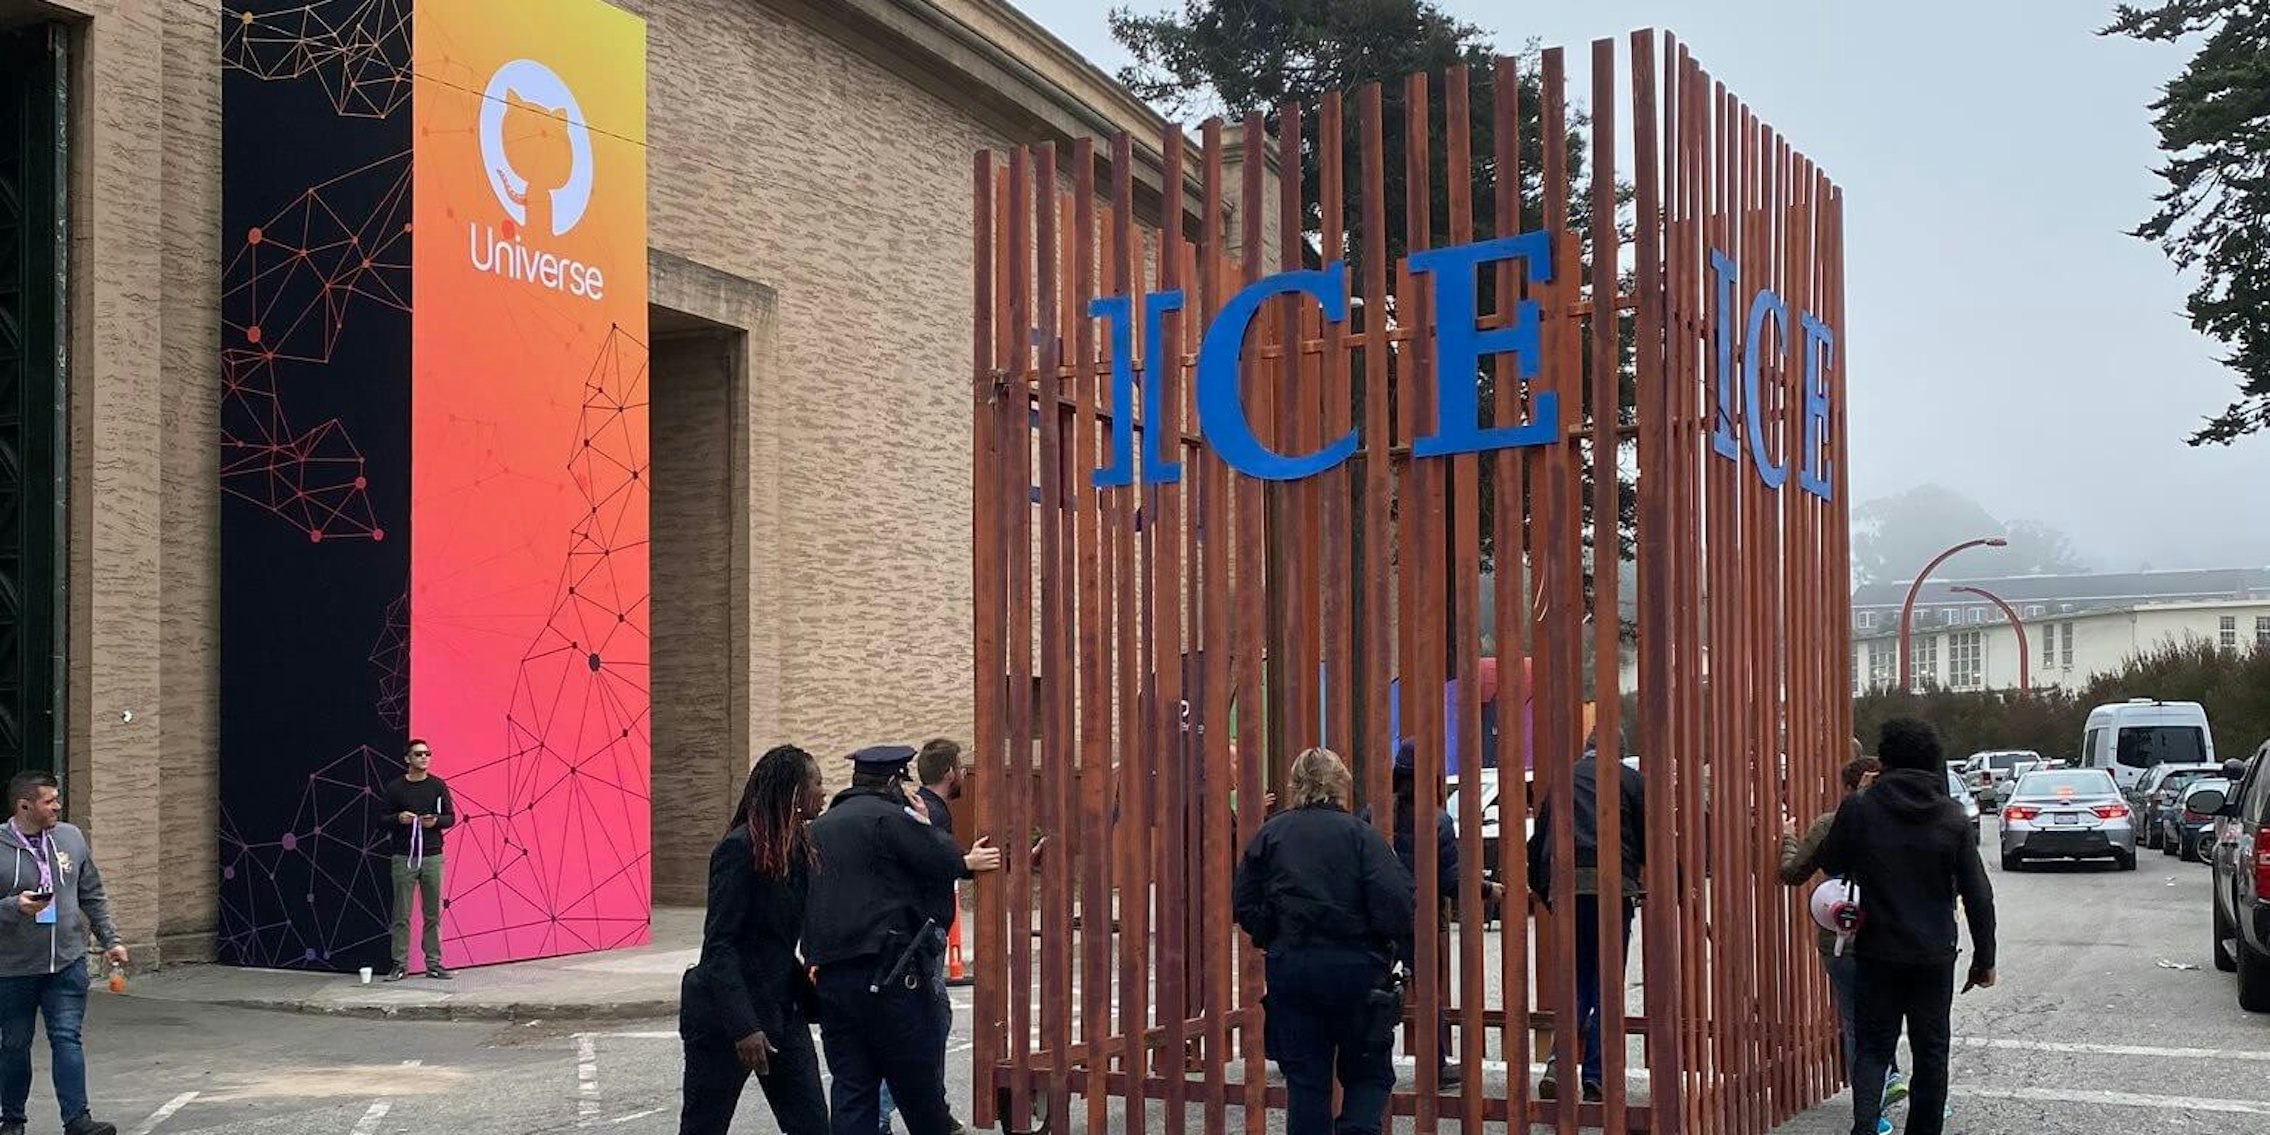 A makeshift 'ICE' cage put outside GitHub Universe event to protest its contract with ICE